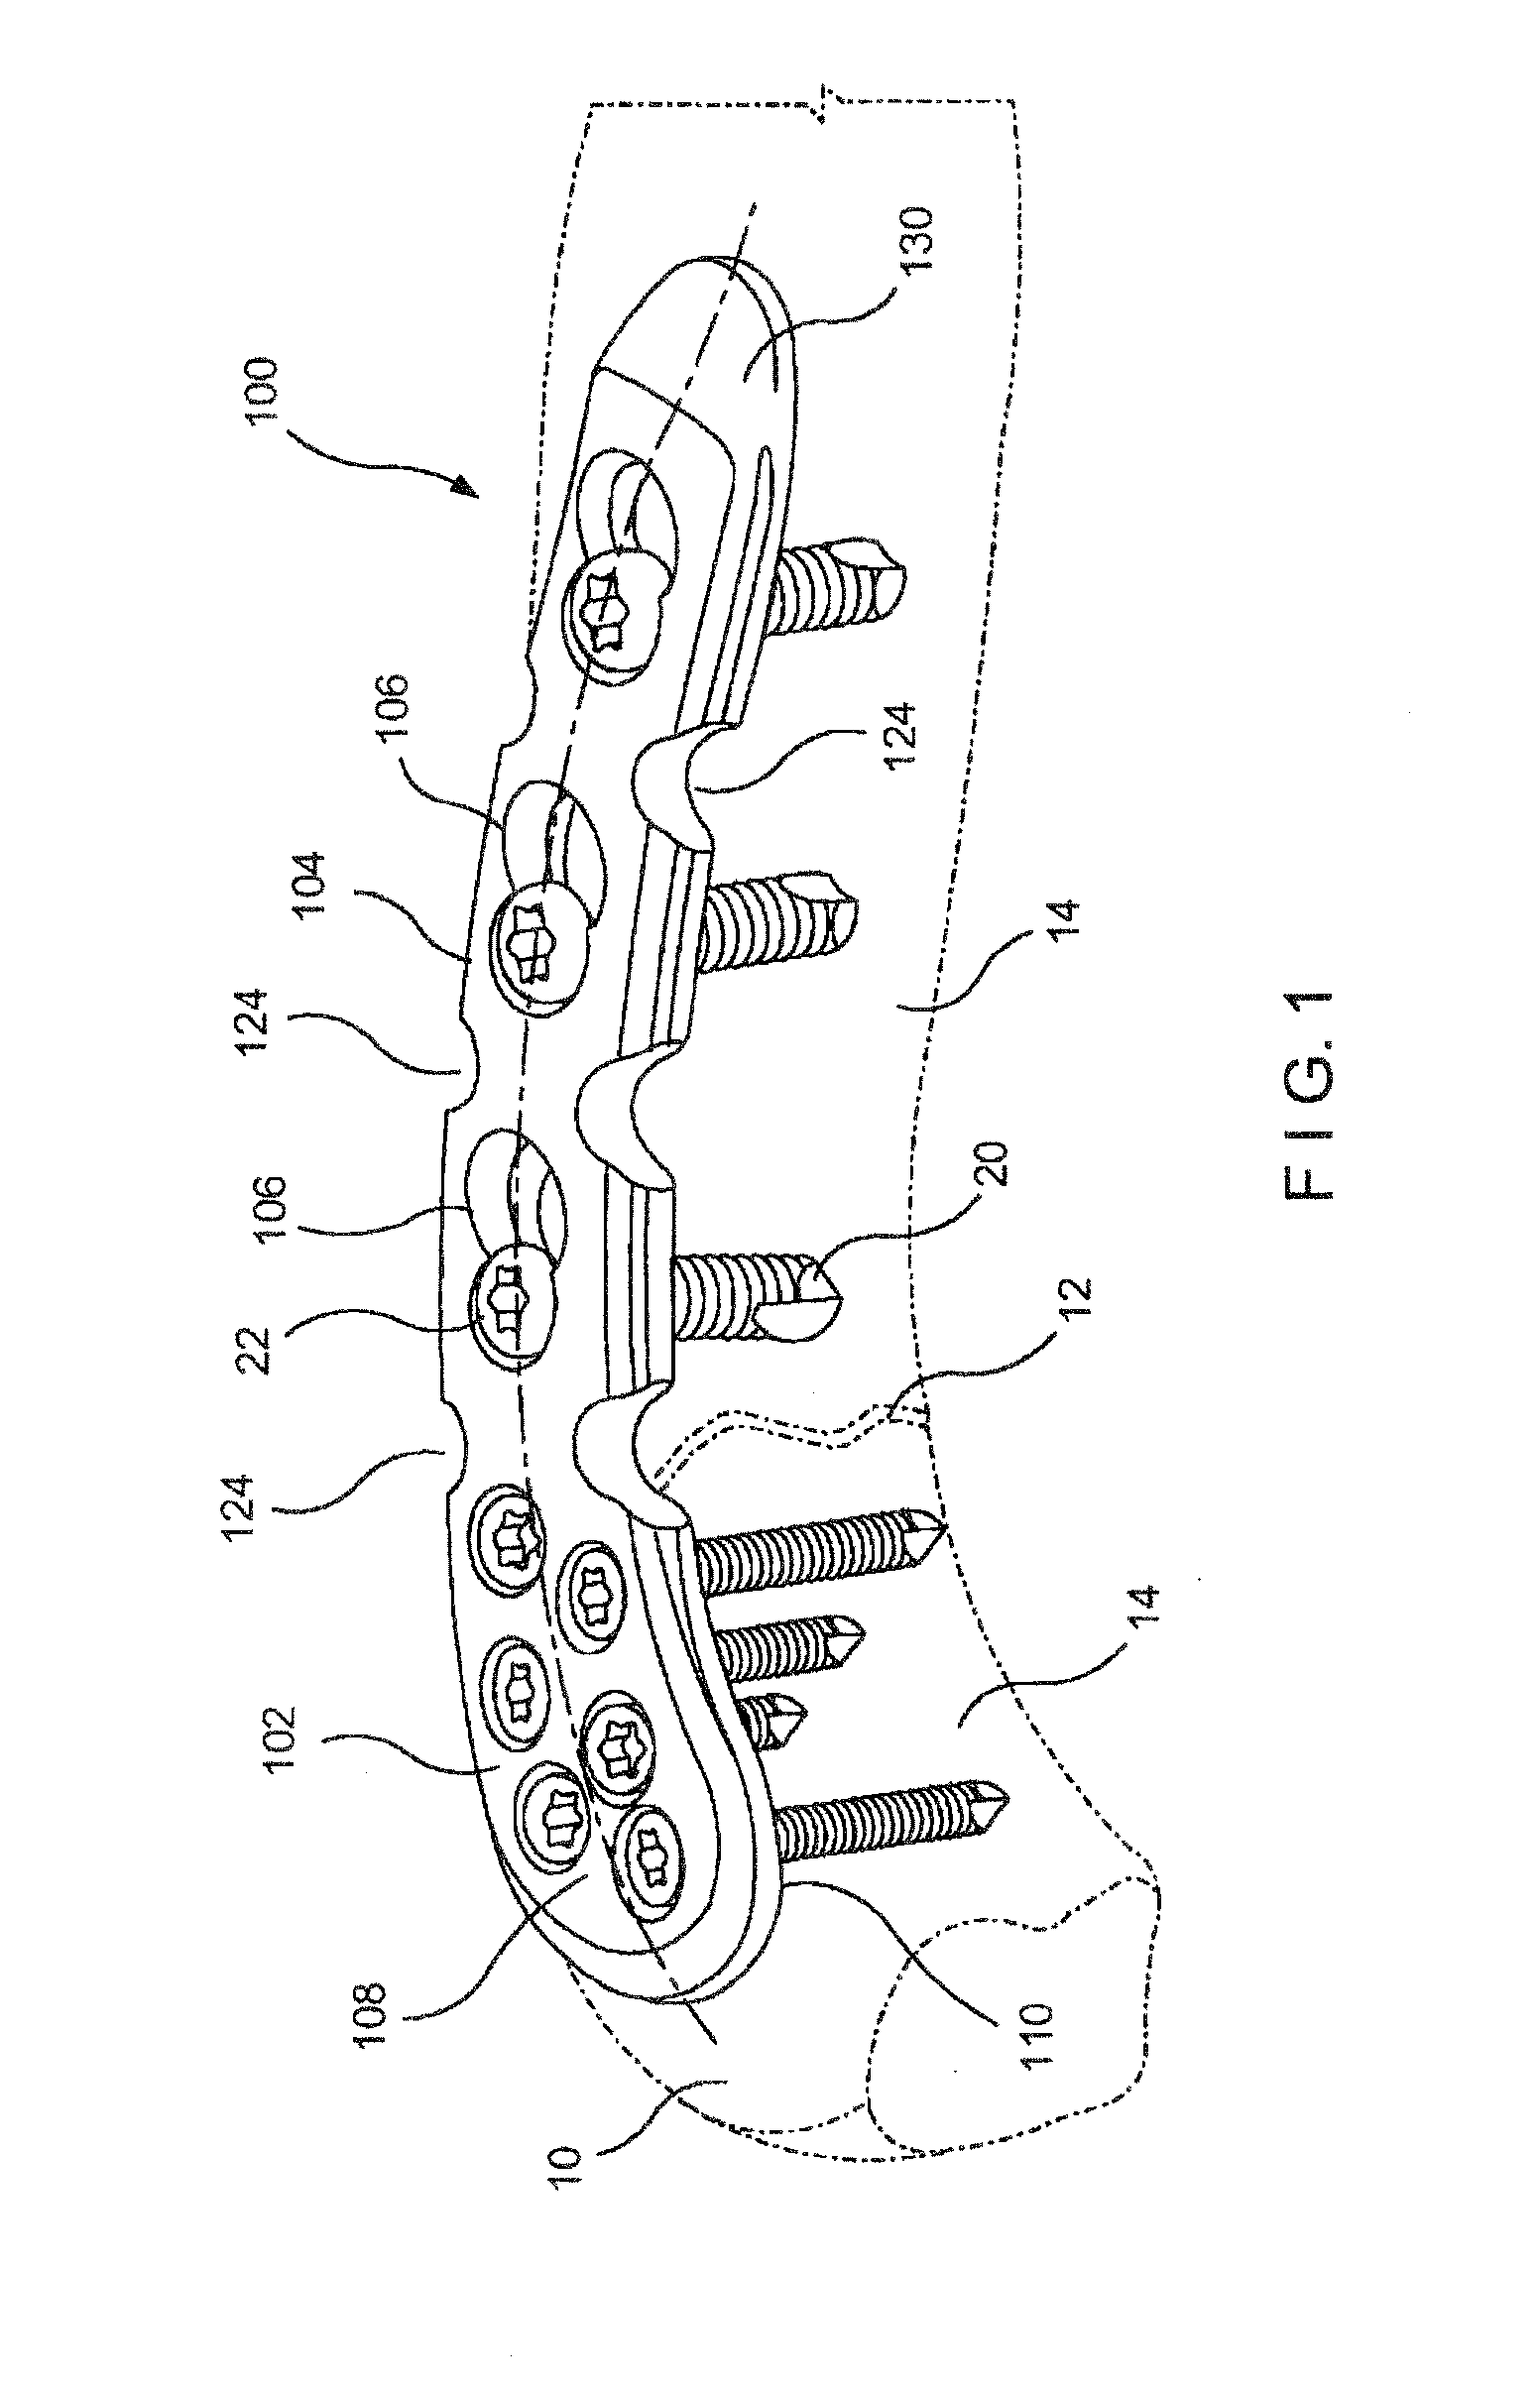 System and Method for Minimally Invasive Clavicle Plate Application